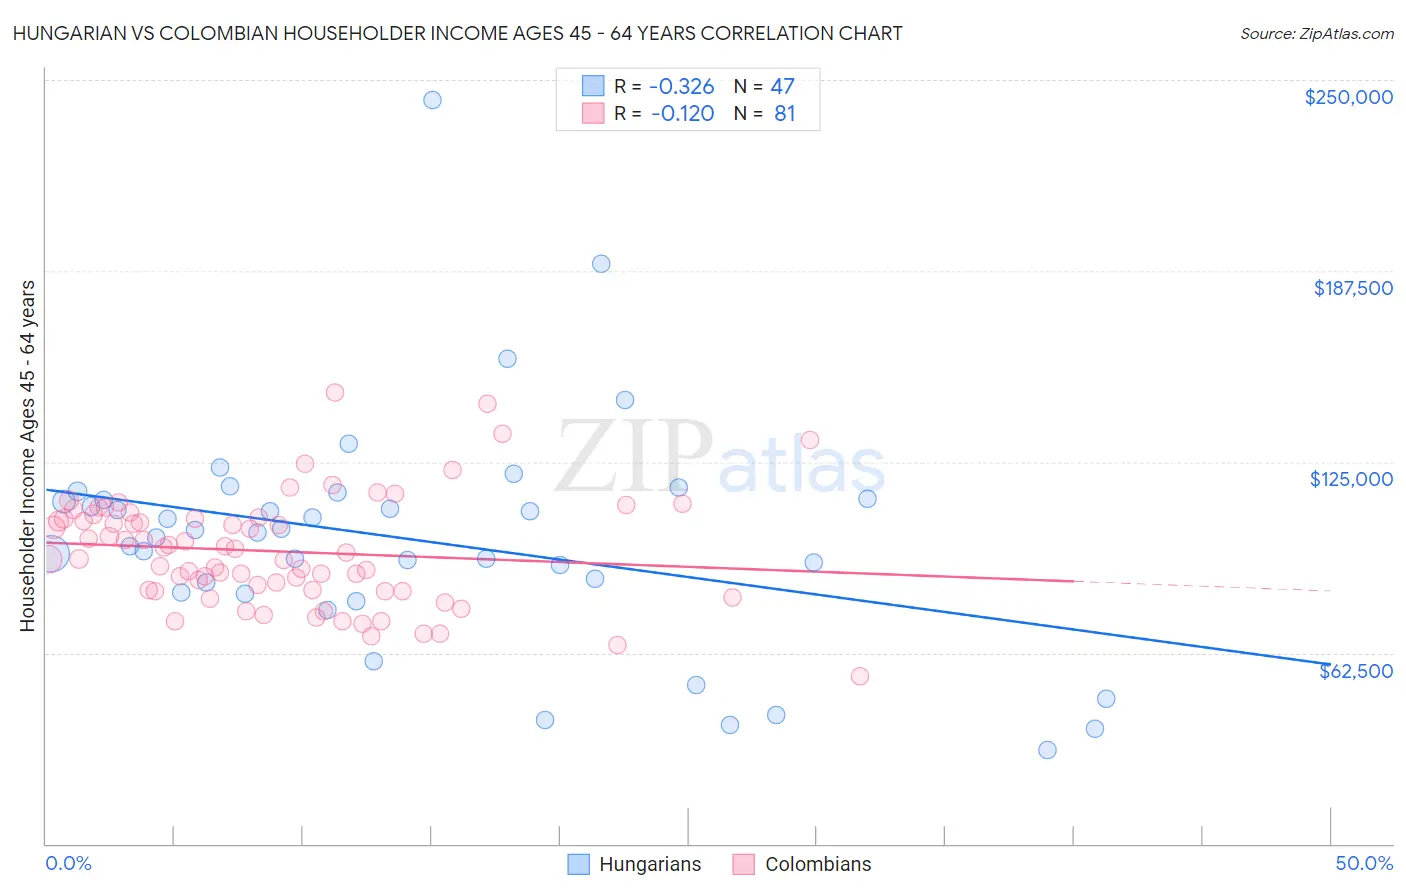 Hungarian vs Colombian Householder Income Ages 45 - 64 years